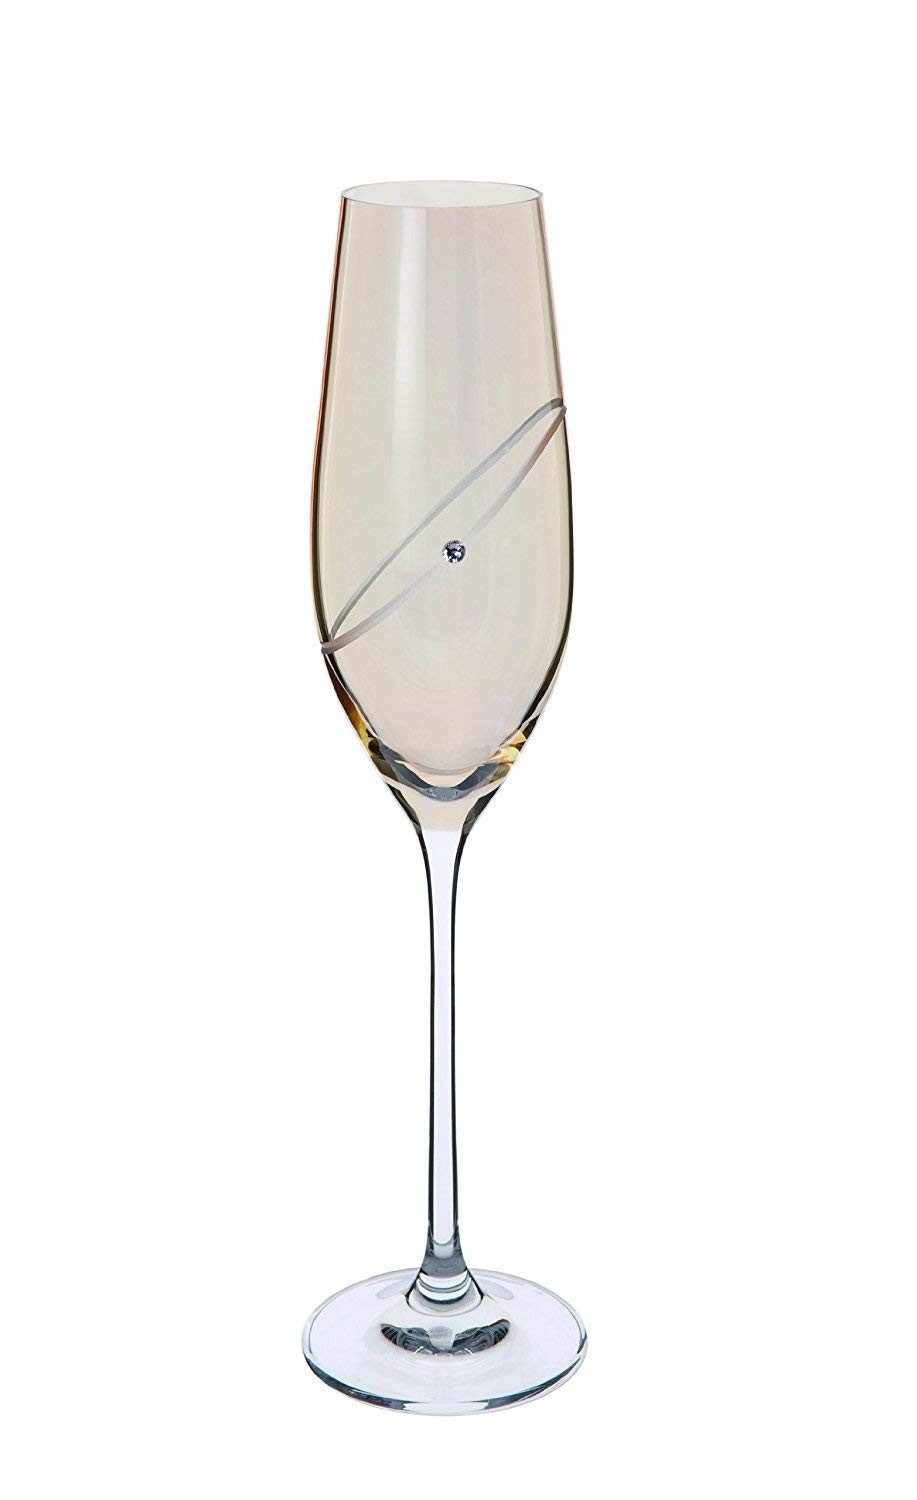 24 Fantastic Tall Margarita Glass Vase 2024 free download tall margarita glass vase of dartington crystal glitz gold flutes pair champagne wine flute party intended for pair of two excellent dartington crystal gold flutes the perfect 50th anniversa